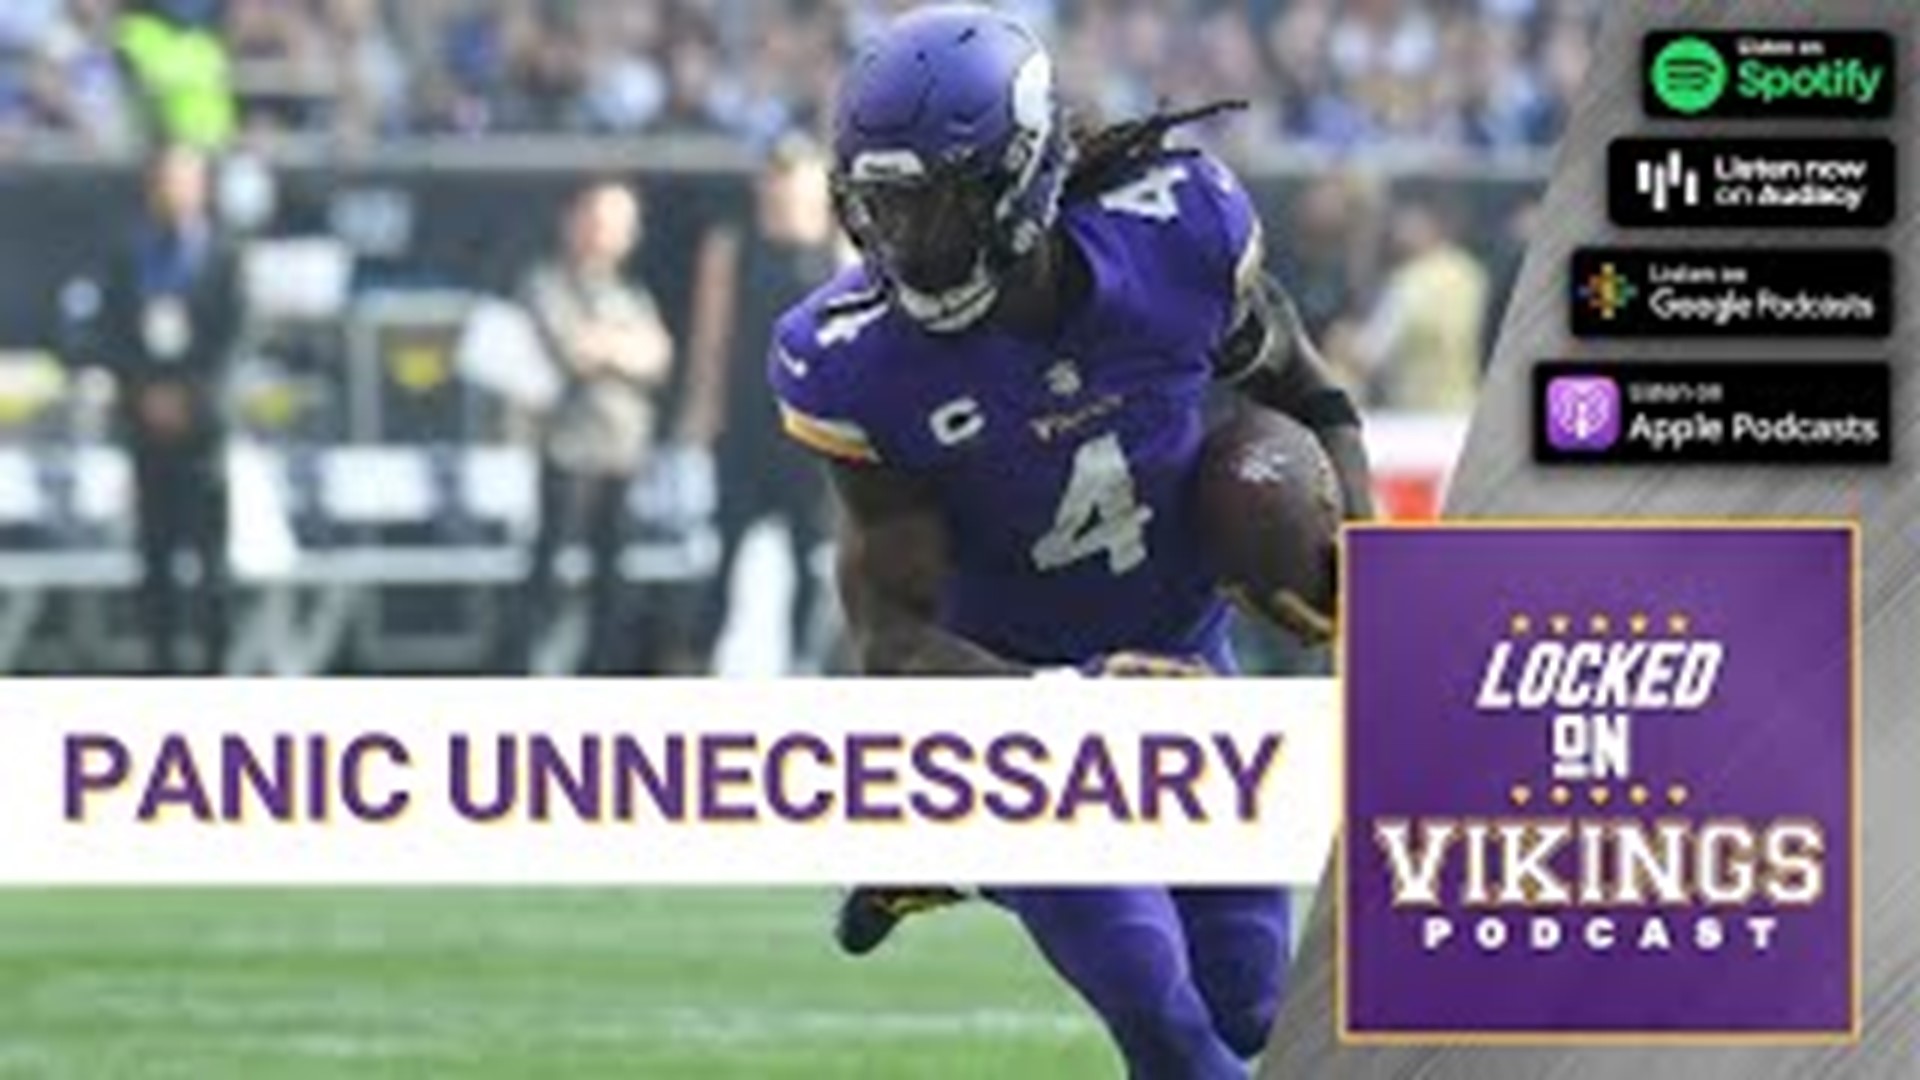 It's a particularly panickly Twitter Tuesday mailbag here on the Locked On Vikings podcast - Dalvin Cook concerns, Danielle Hunter concerns, firing Ed Donatello.